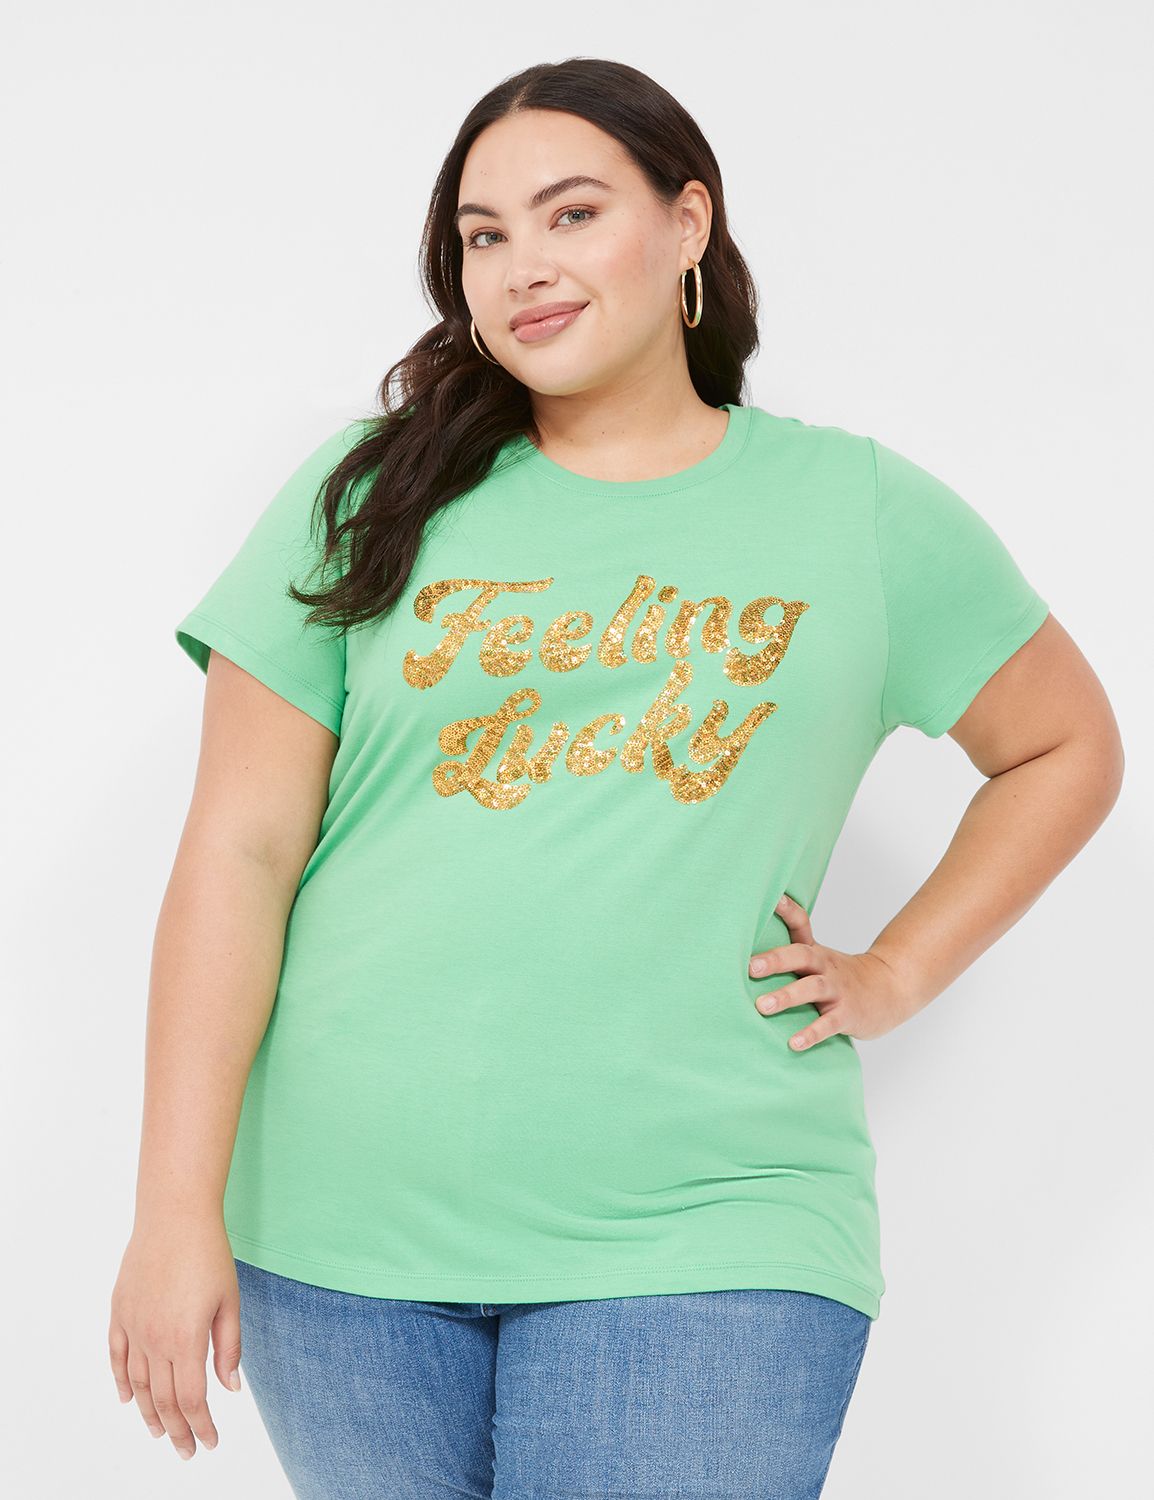 Lane Bryant: Save 40% on size-inclusive clothing for St. Patrick's Day